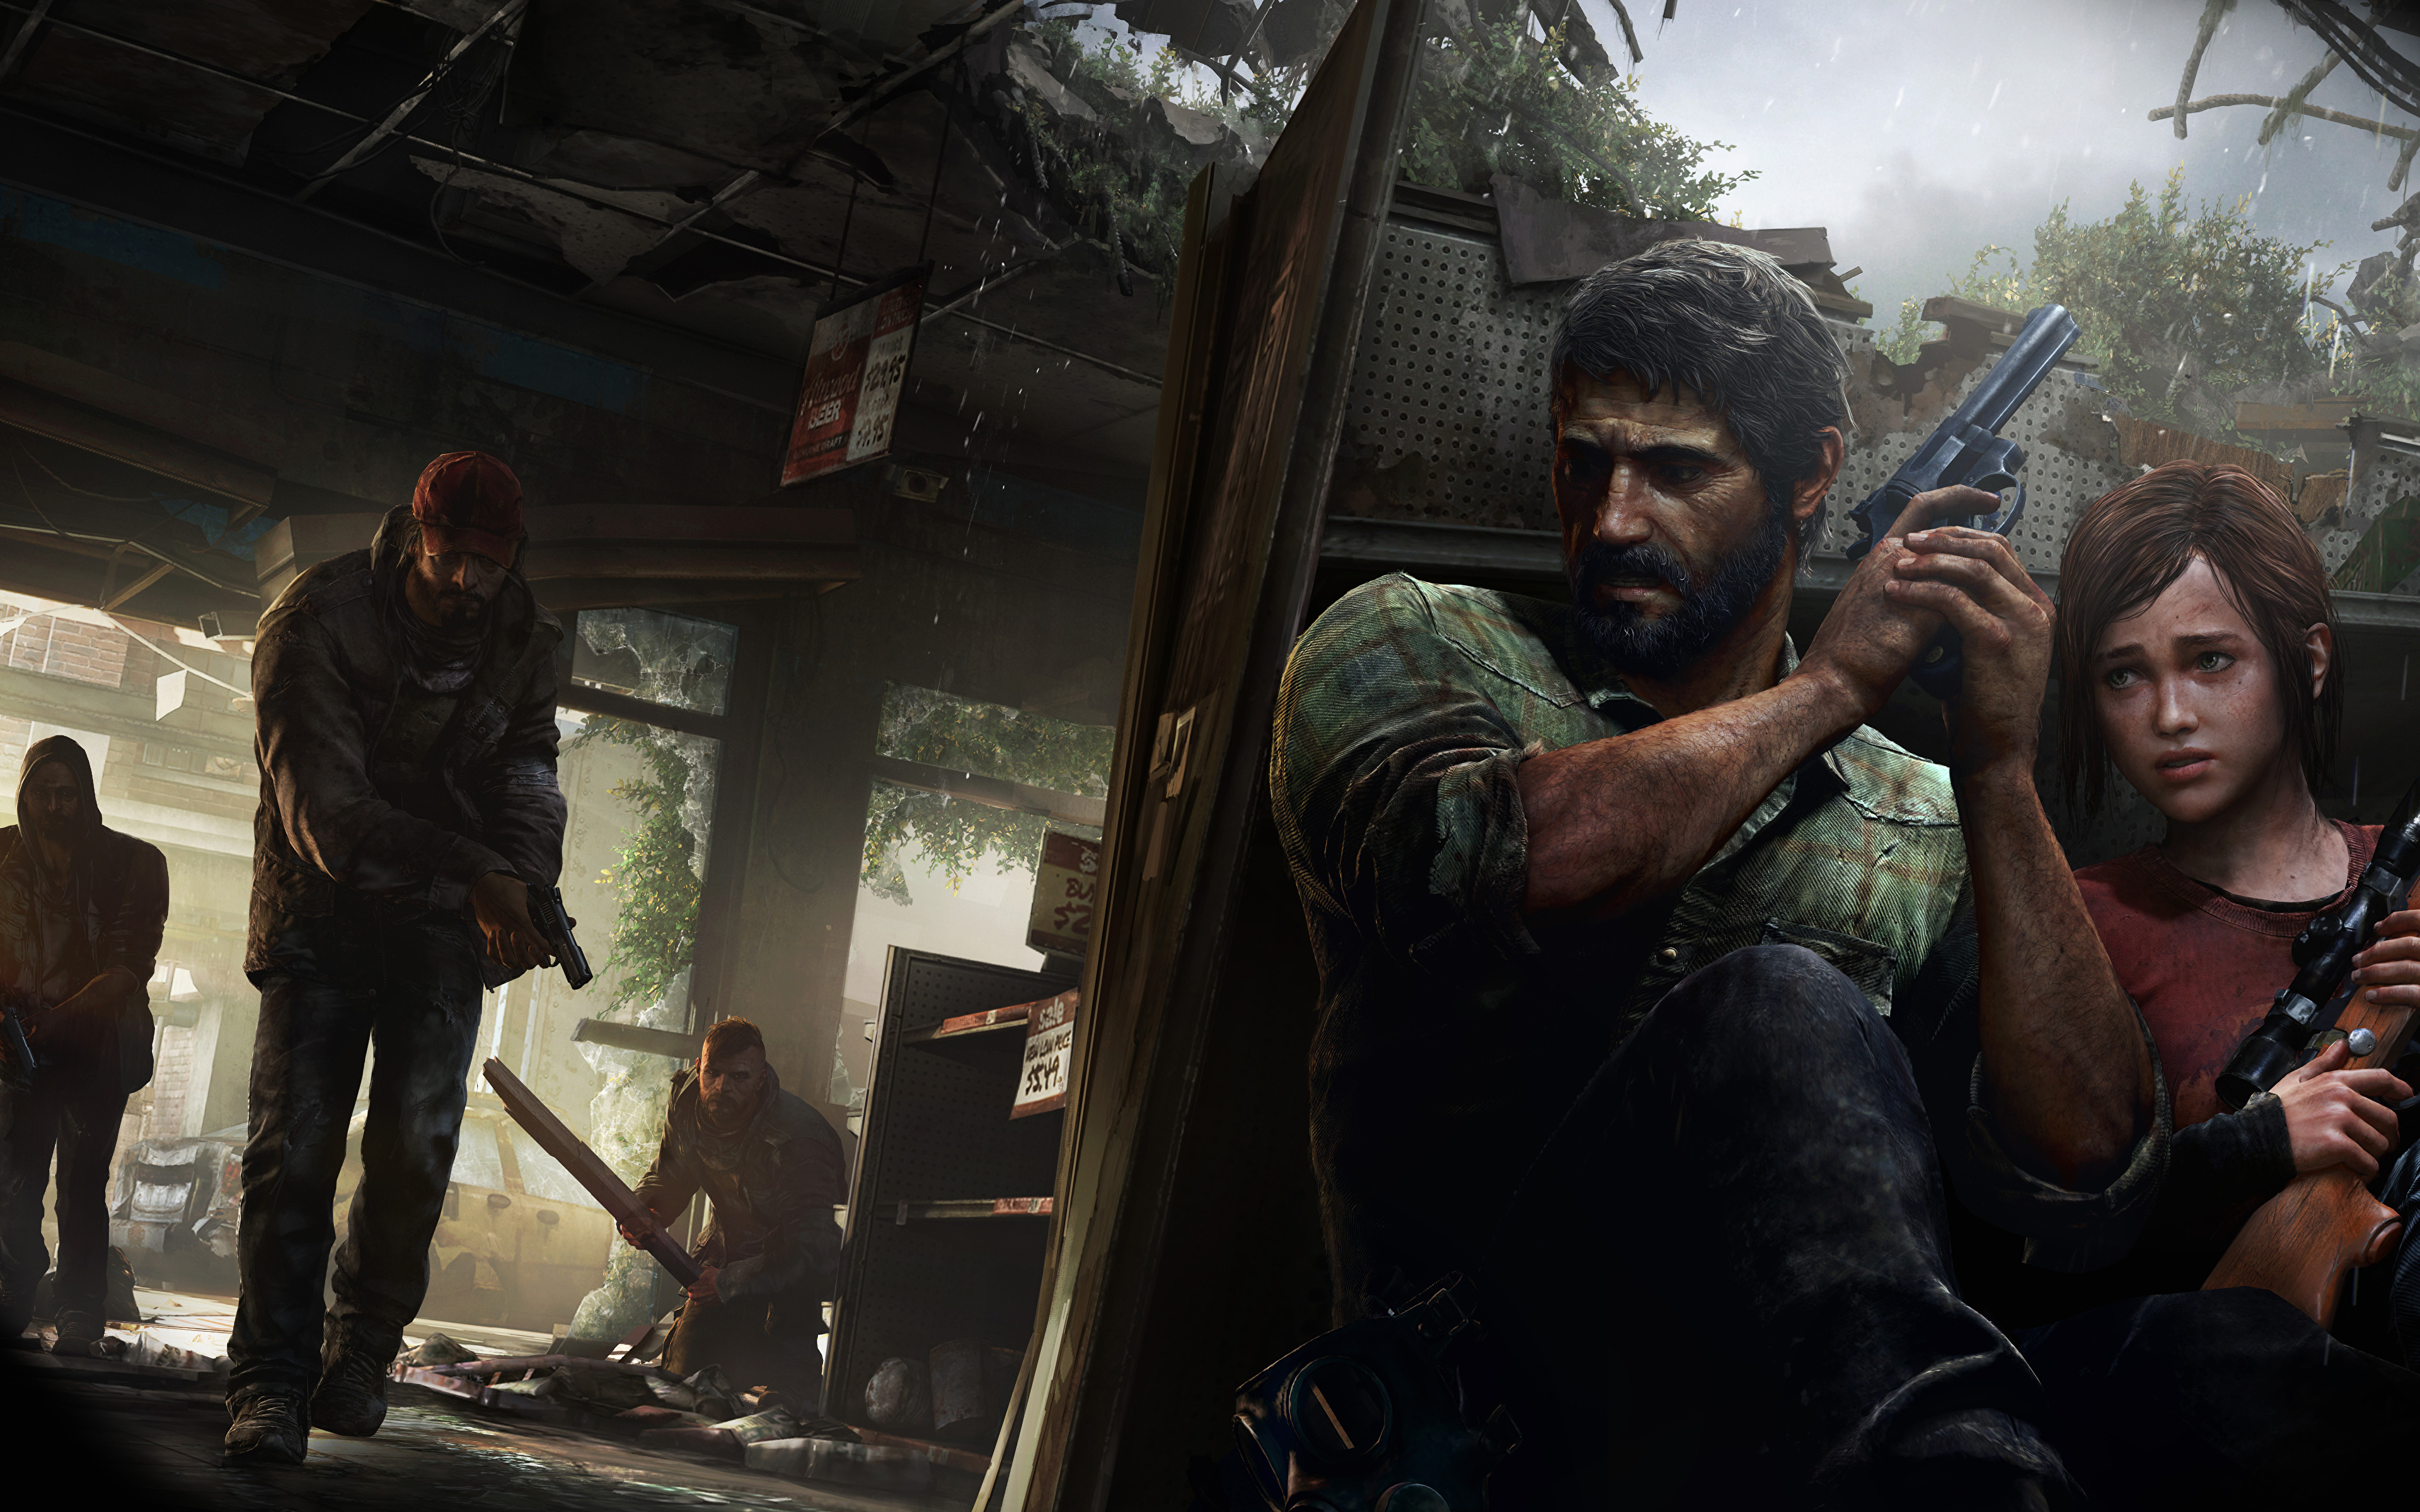 Apocalust game. The last of us. The last of us ремейк Джоэл. Джоэл the last of us 2013. Джоэл из the last of us.